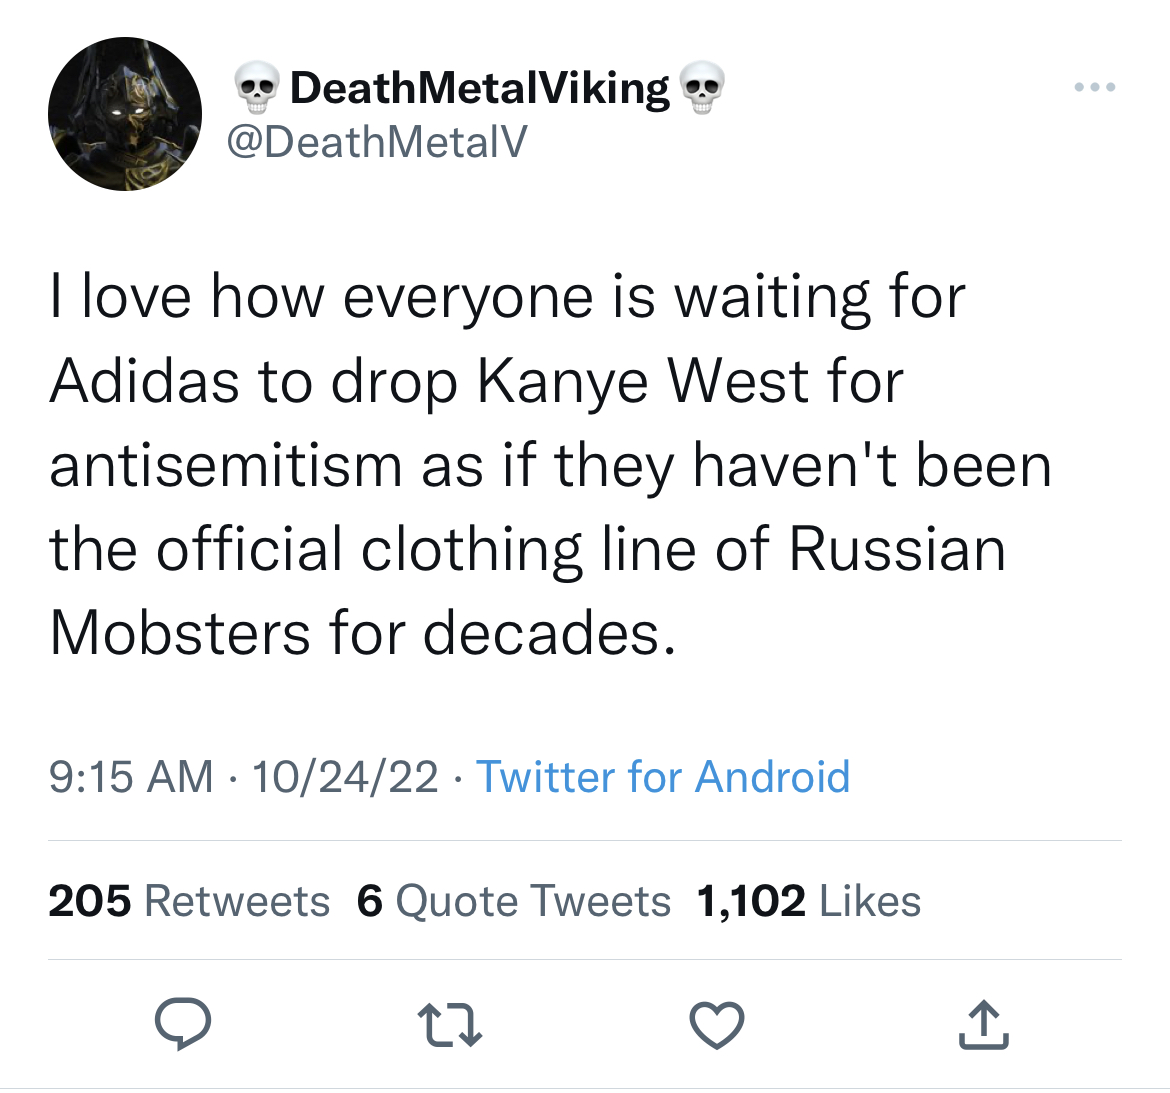 tweets roasting celebs - vanessa carlton taylor swift - Death MetalViking. I love how everyone is waiting for Adidas to drop Kanye West for antisemitism as if they haven't been the official clothing line of Russian Mobsters for decades. 102422 Twitter for